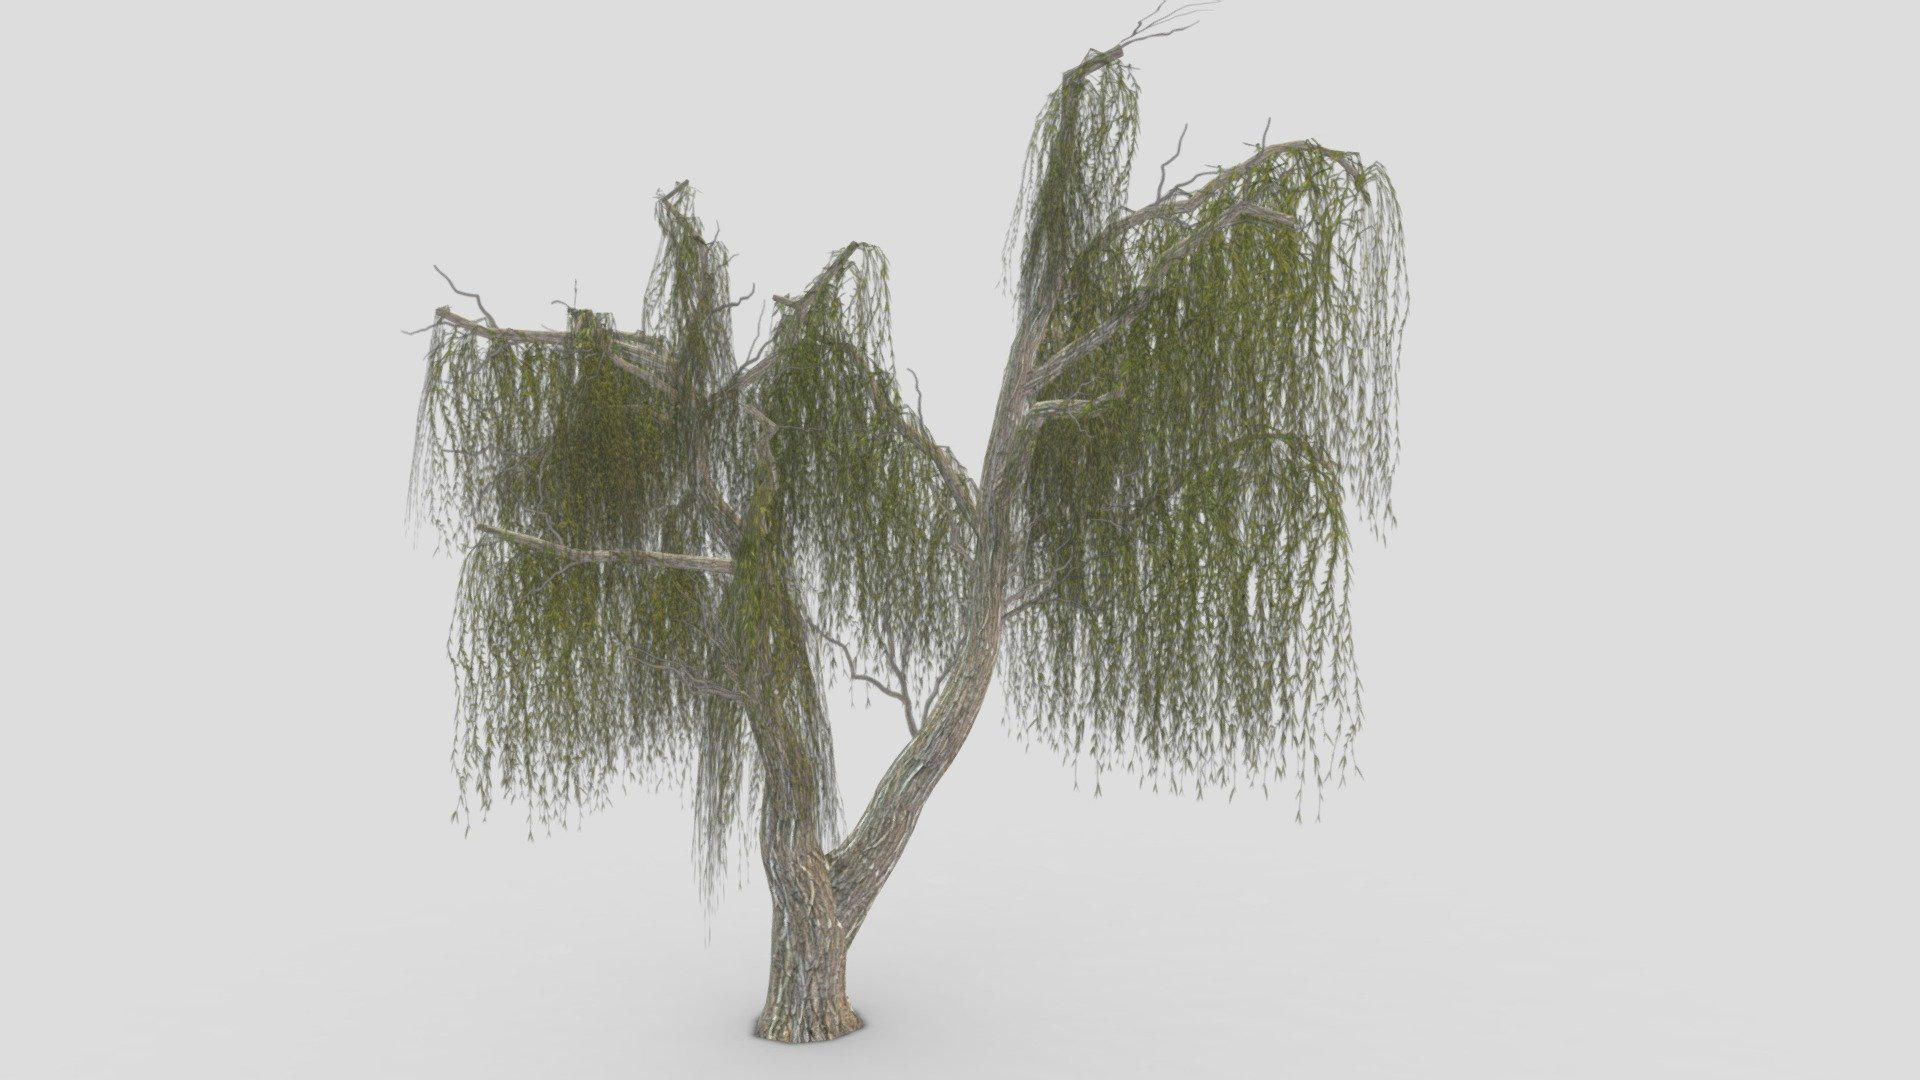 I try to provide low poly model of the Weeping Willow tree to use for your game project. I hope this model will be useful for you 3d model